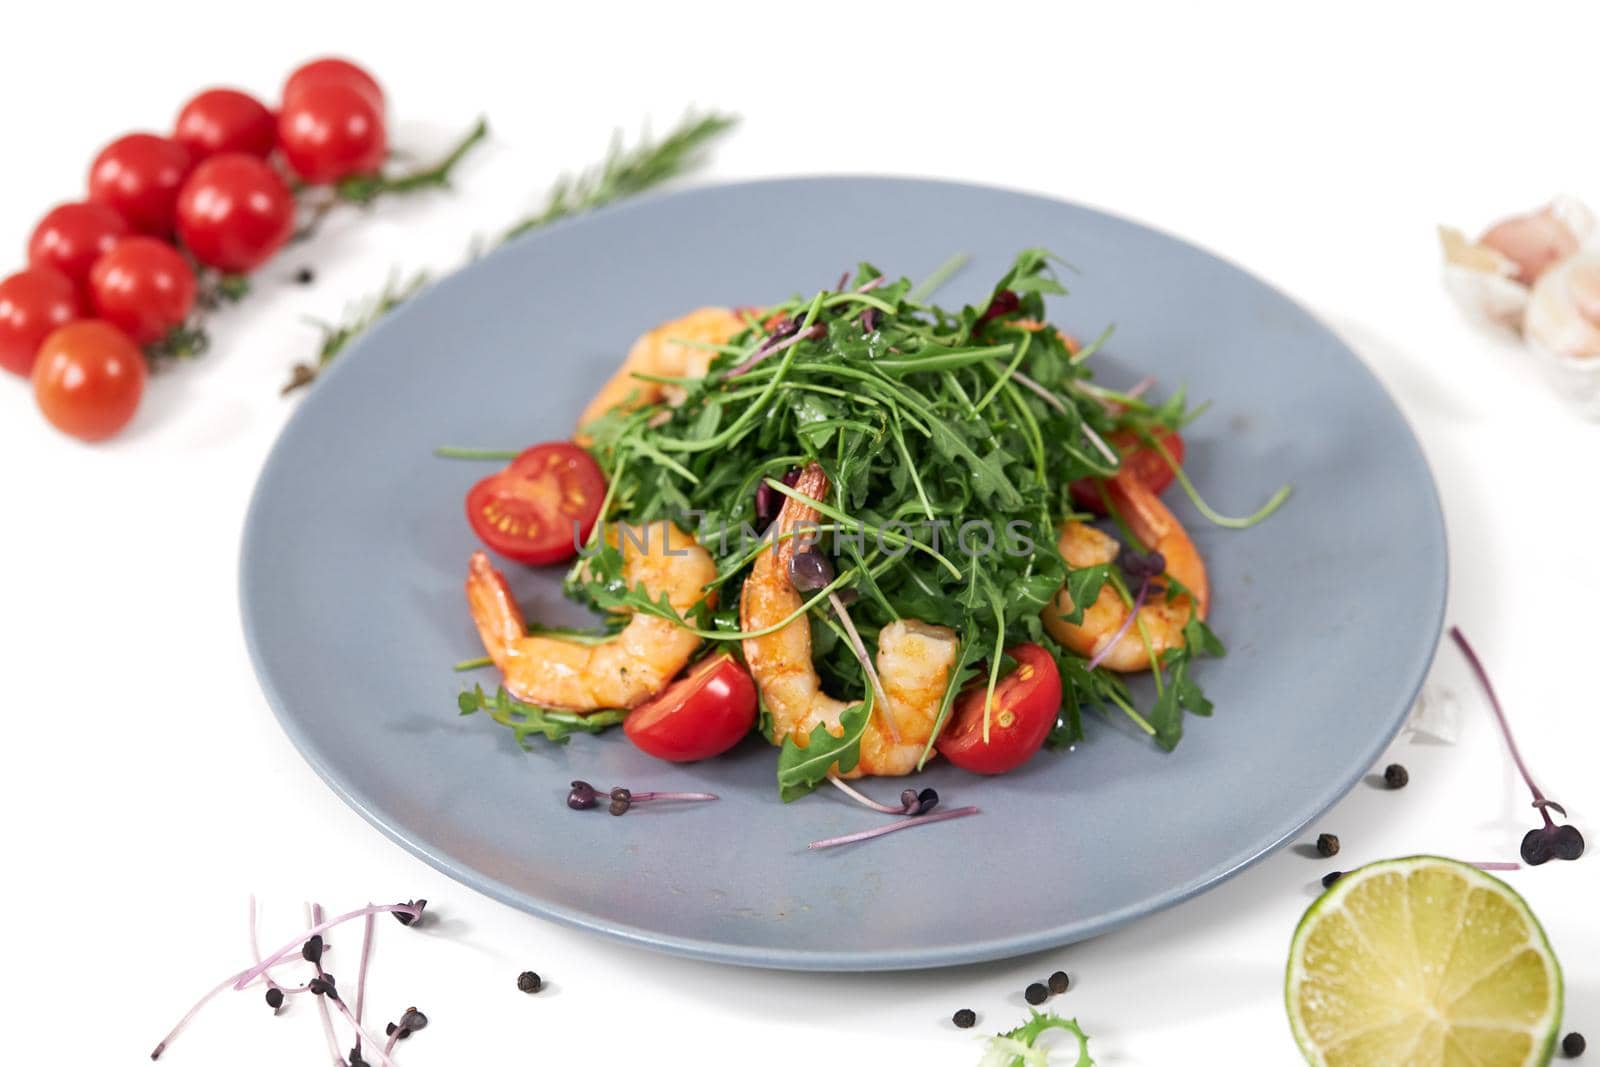 Salad with fresh arugula,tomatoes cherry and juicy shrimps. by SerhiiBobyk